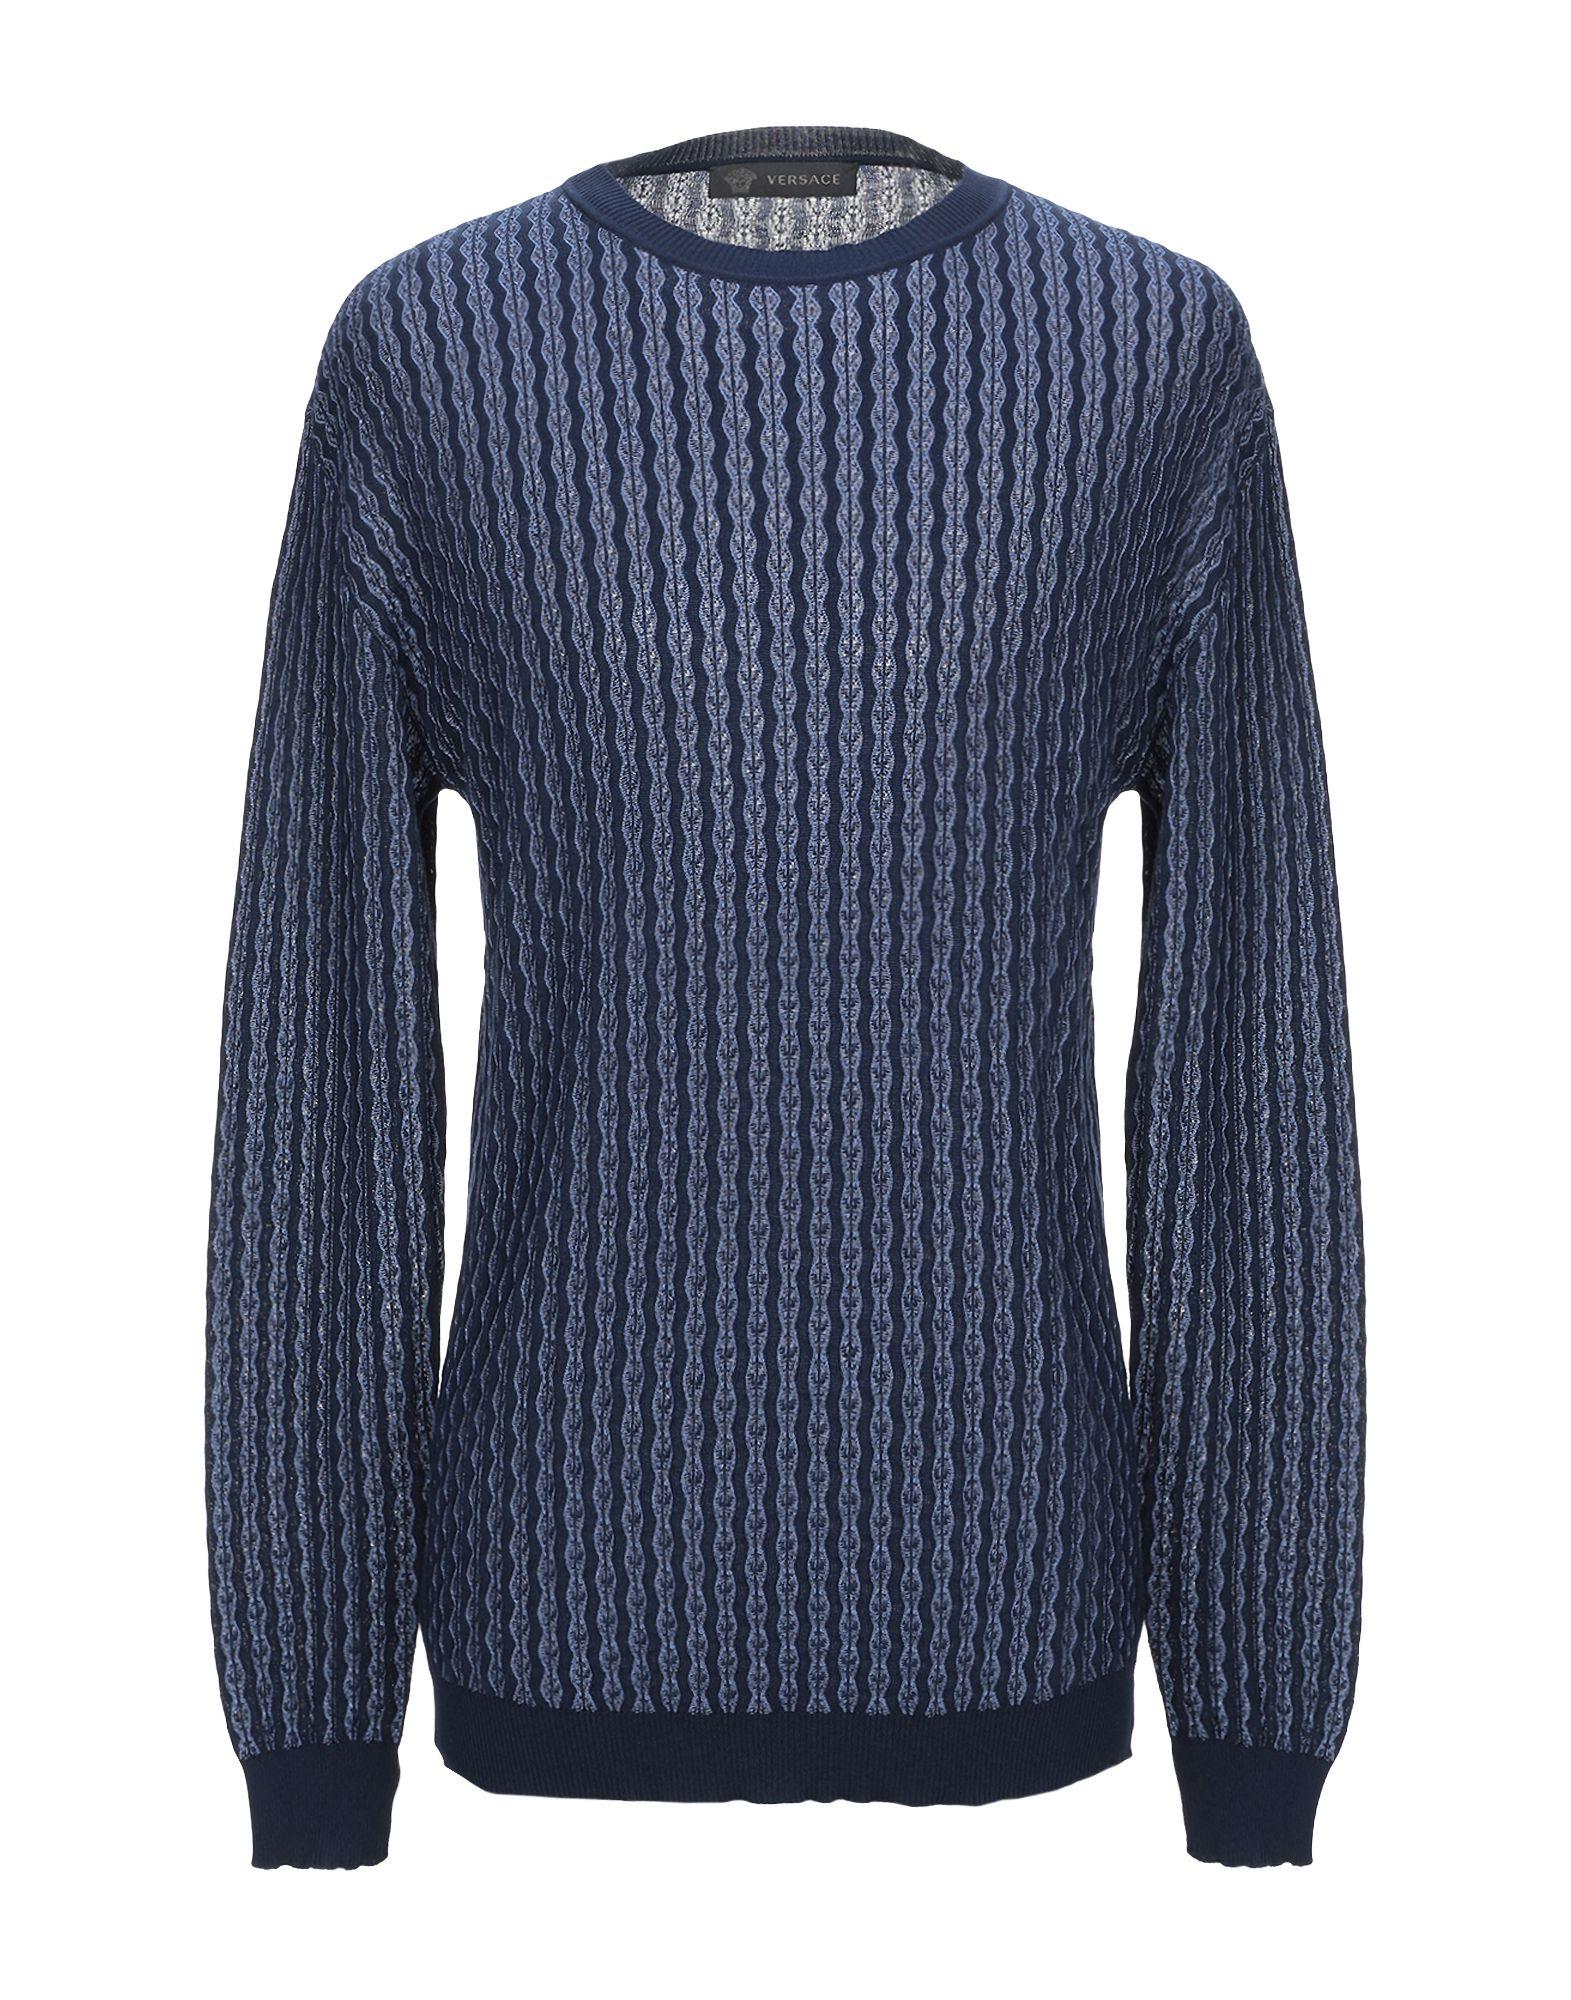 Versace Synthetic Sweater in Blue for Men - Lyst